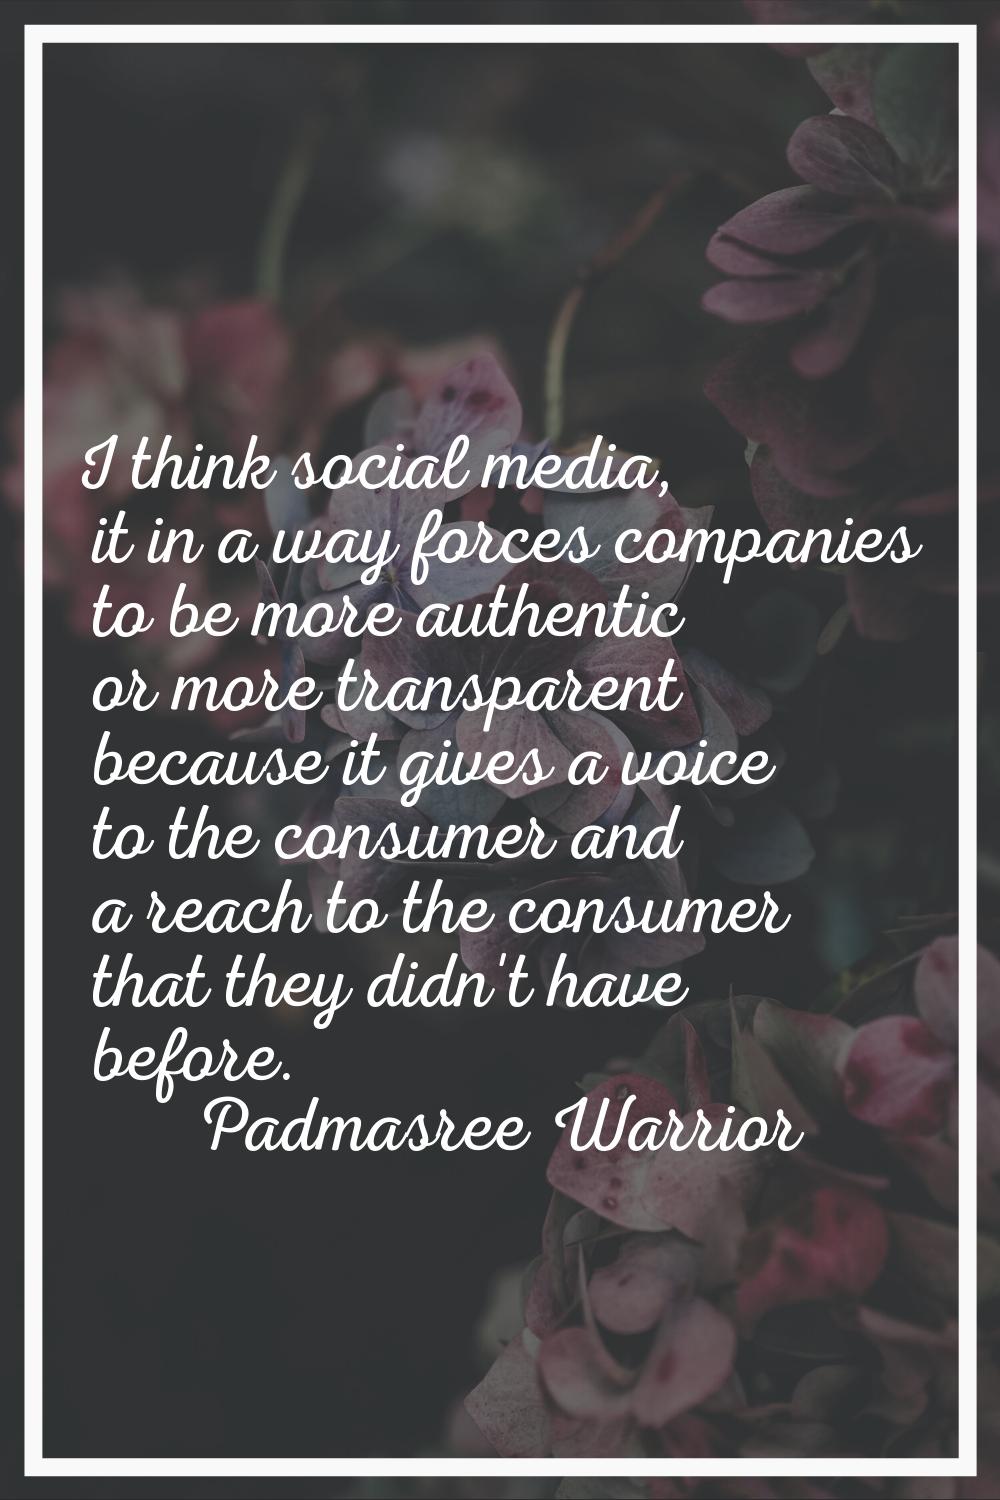 I think social media, it in a way forces companies to be more authentic or more transparent because